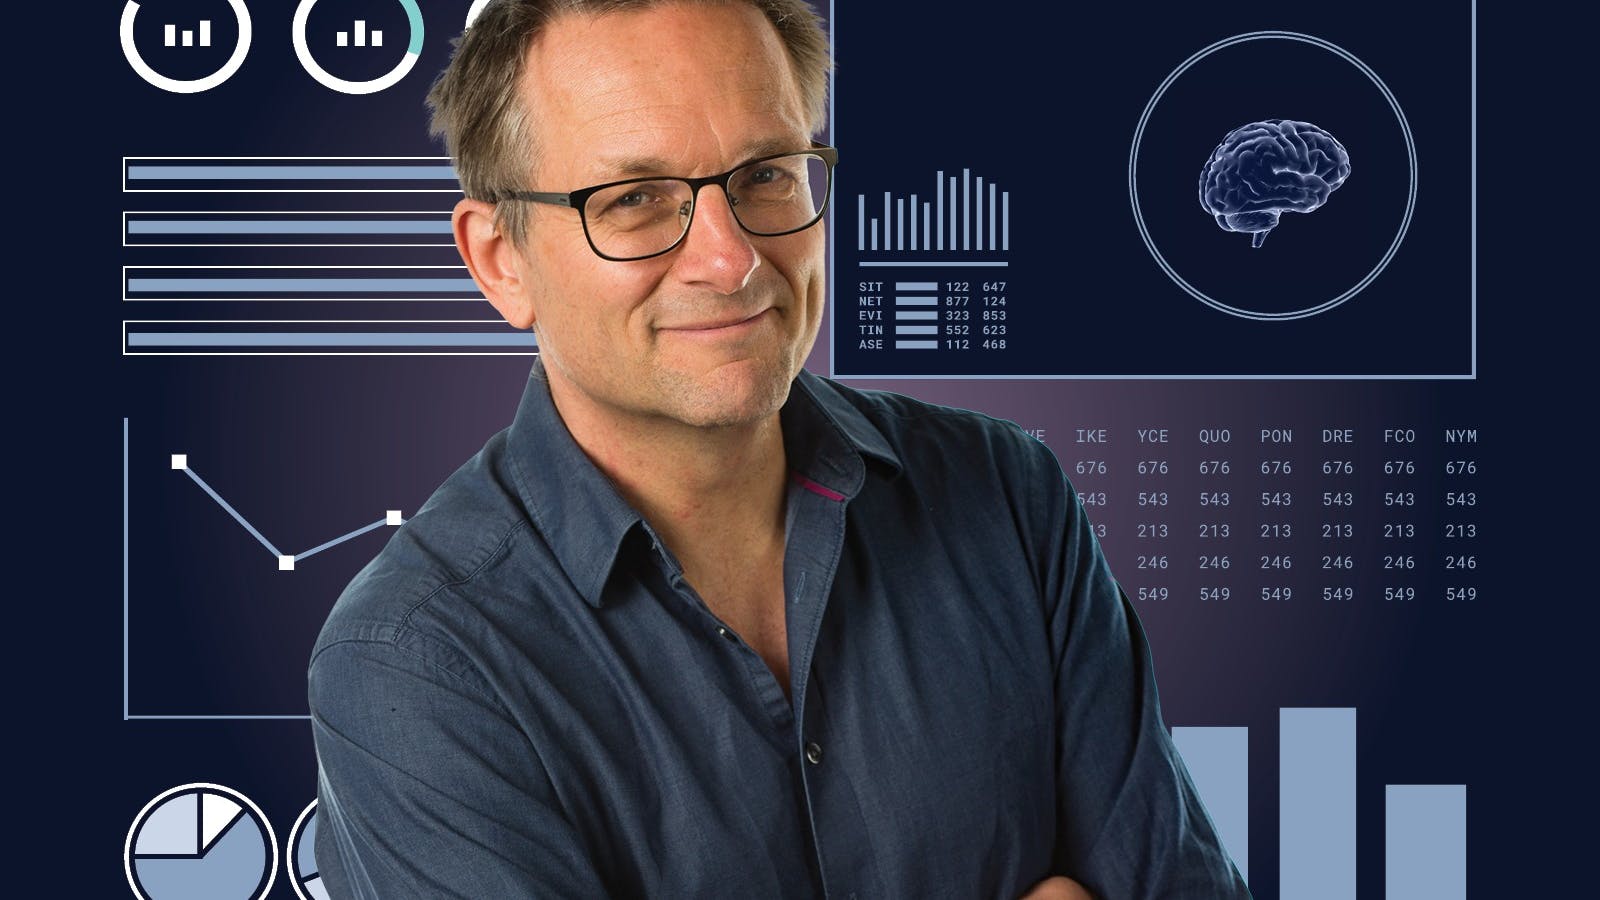 Dr Michael Mosley - A Life Changing Experience – Live on Stage